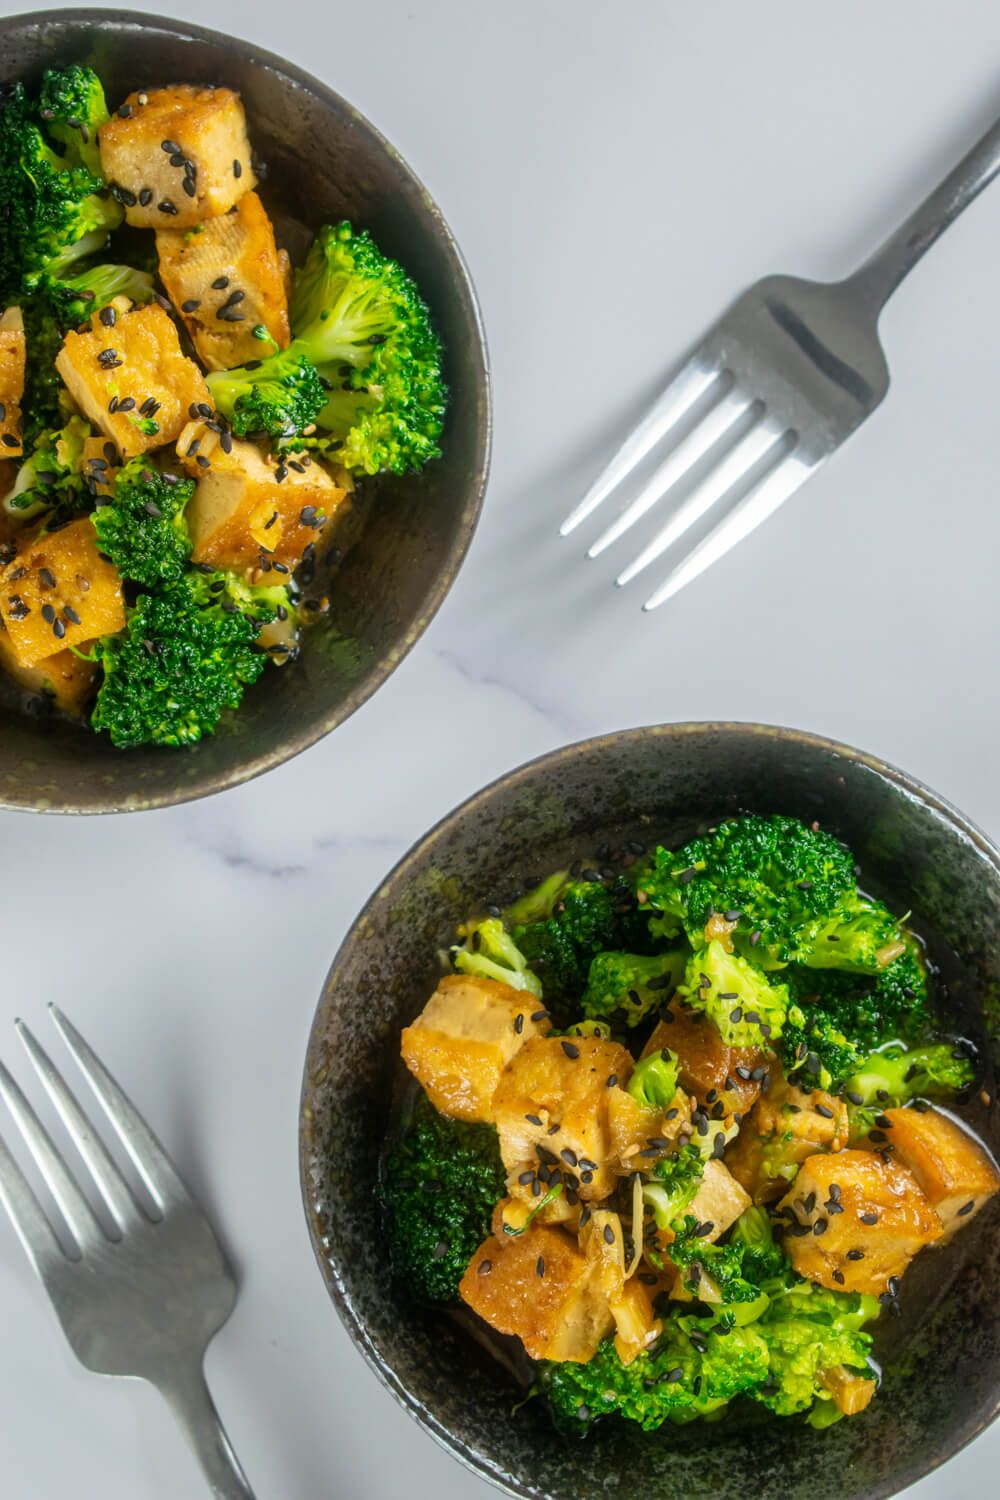 Sesame tofu with sesame seeds and broccoli in two black bowls with forks.